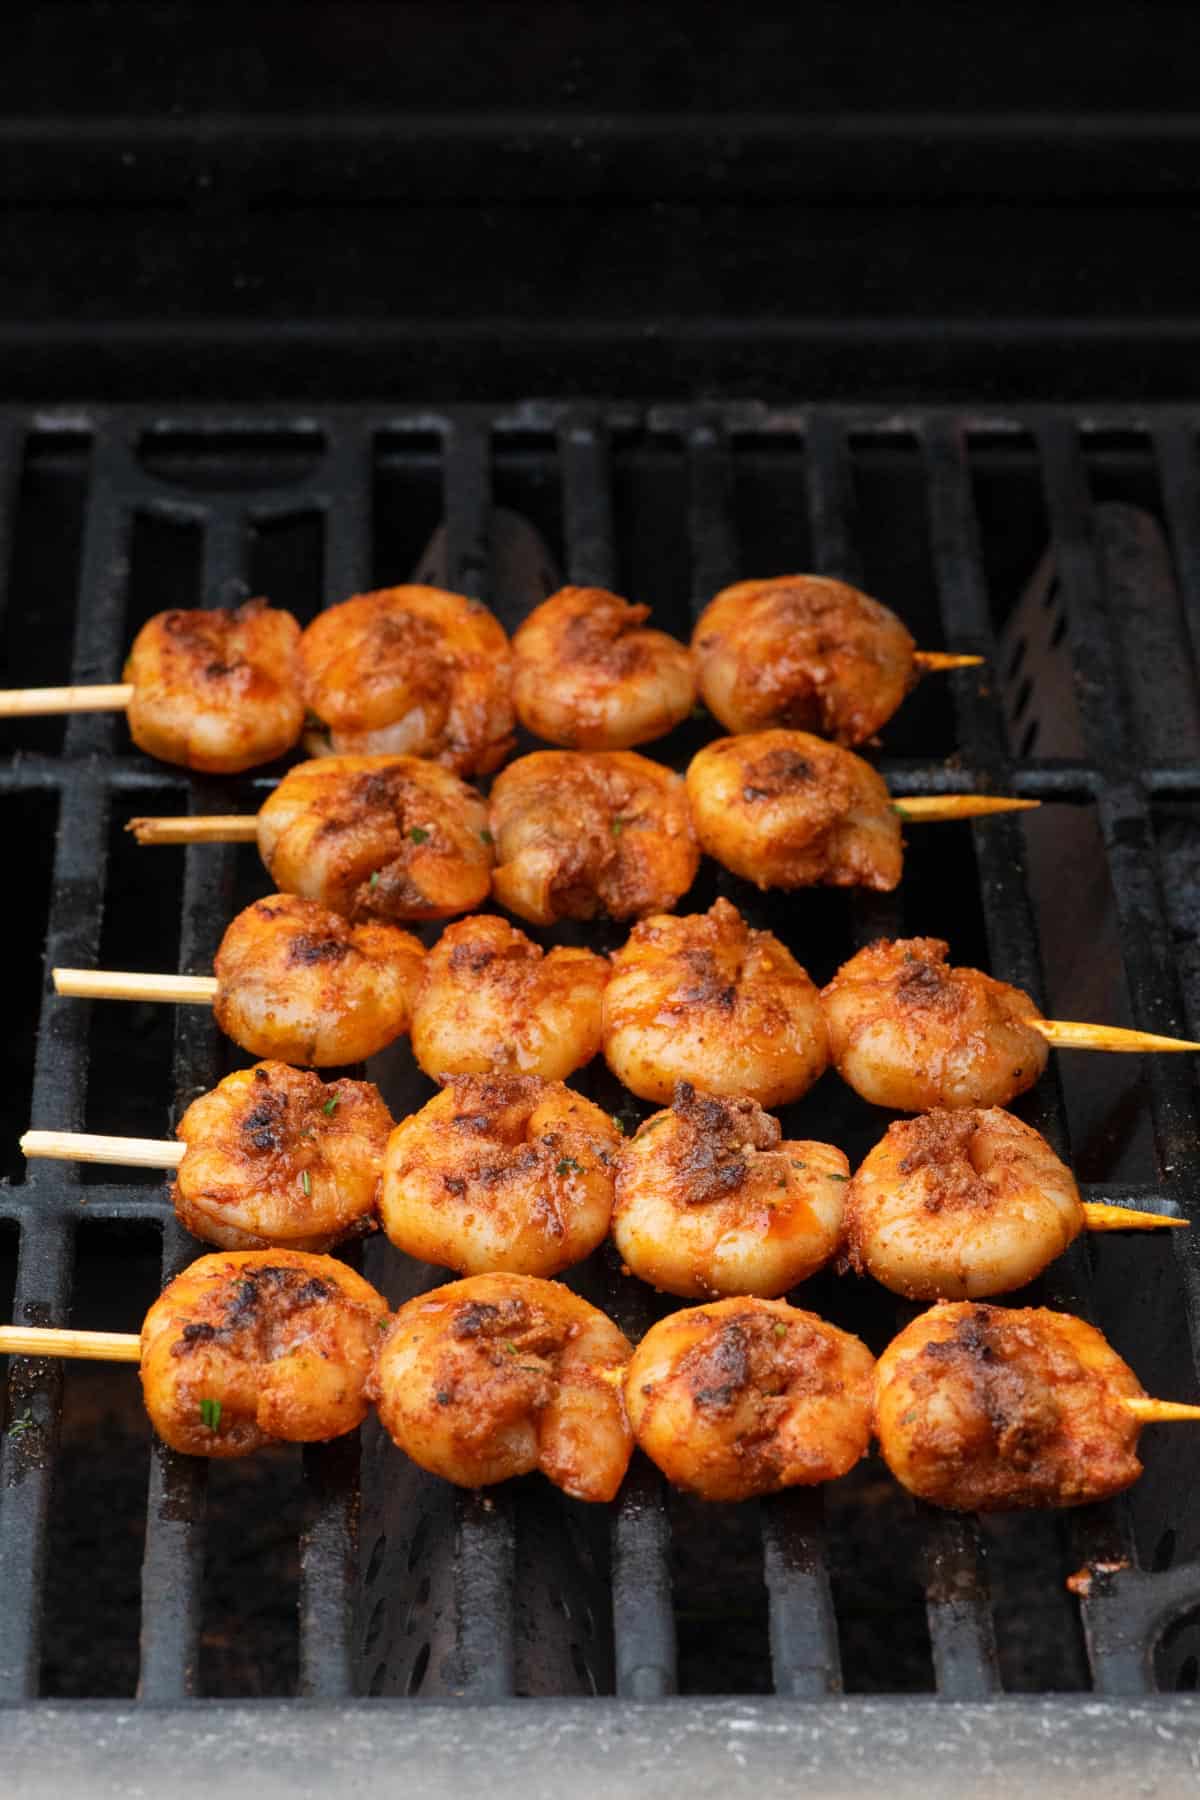 Shrimp skewers on a grill.